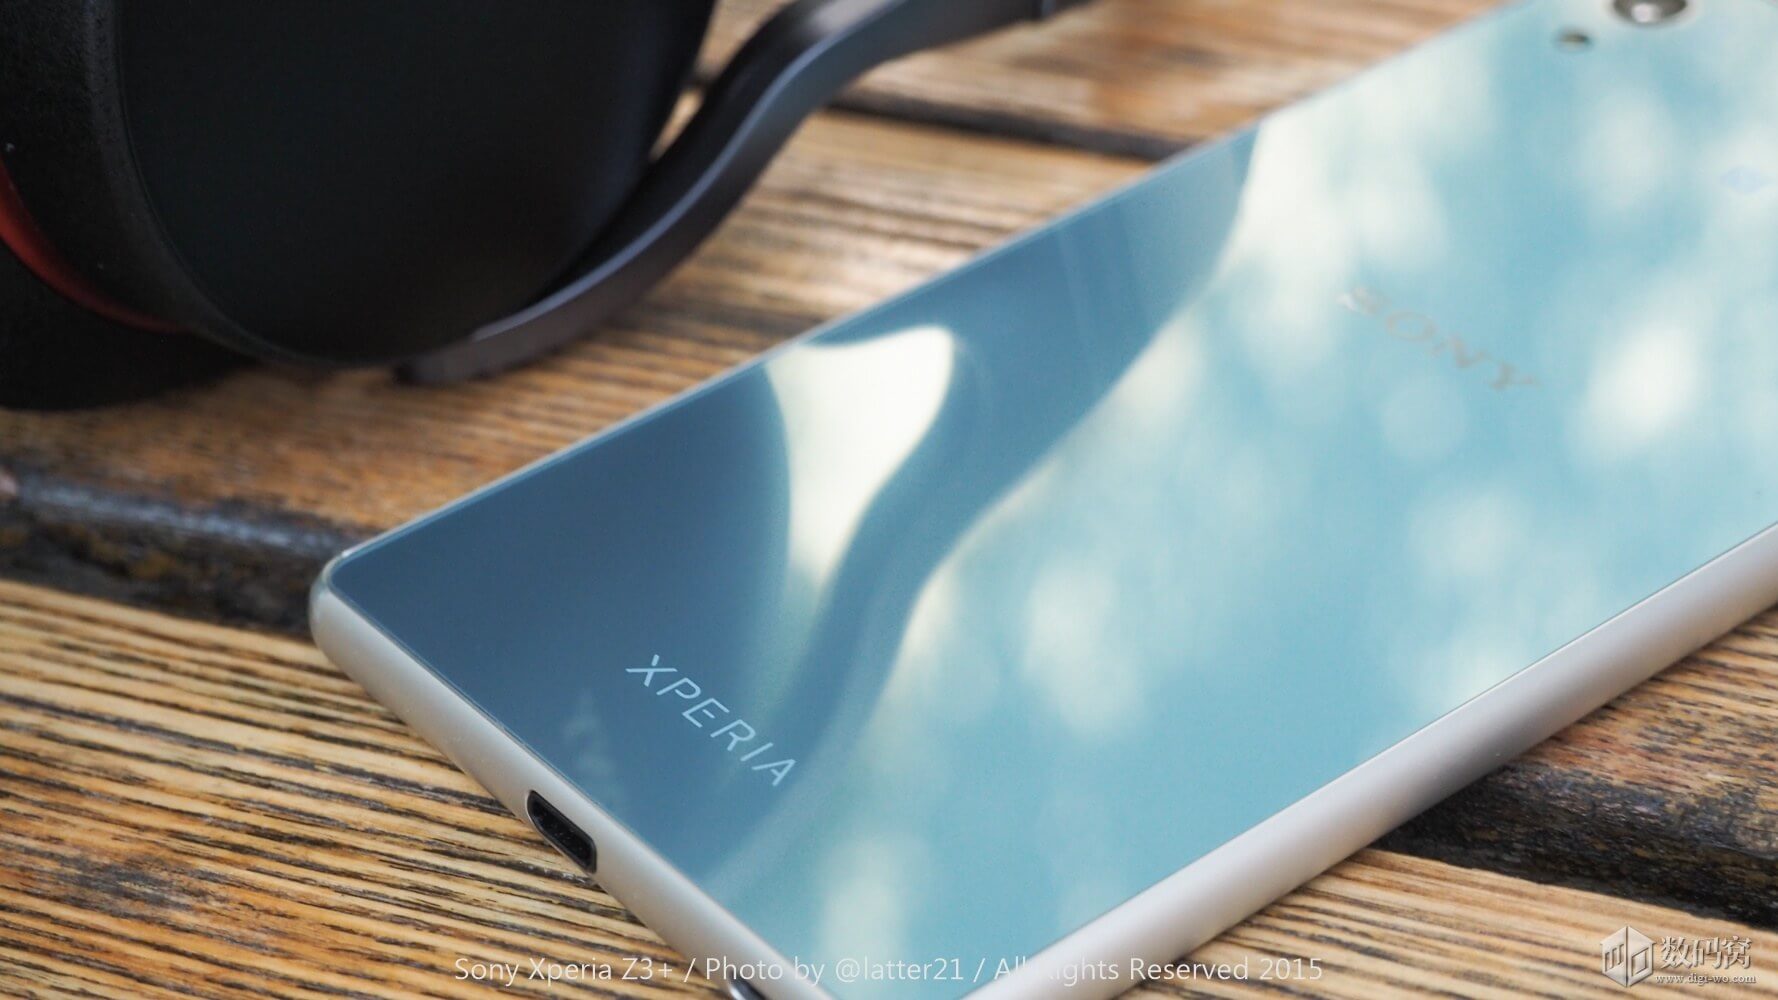 Xperia Z3+ Hands on Review